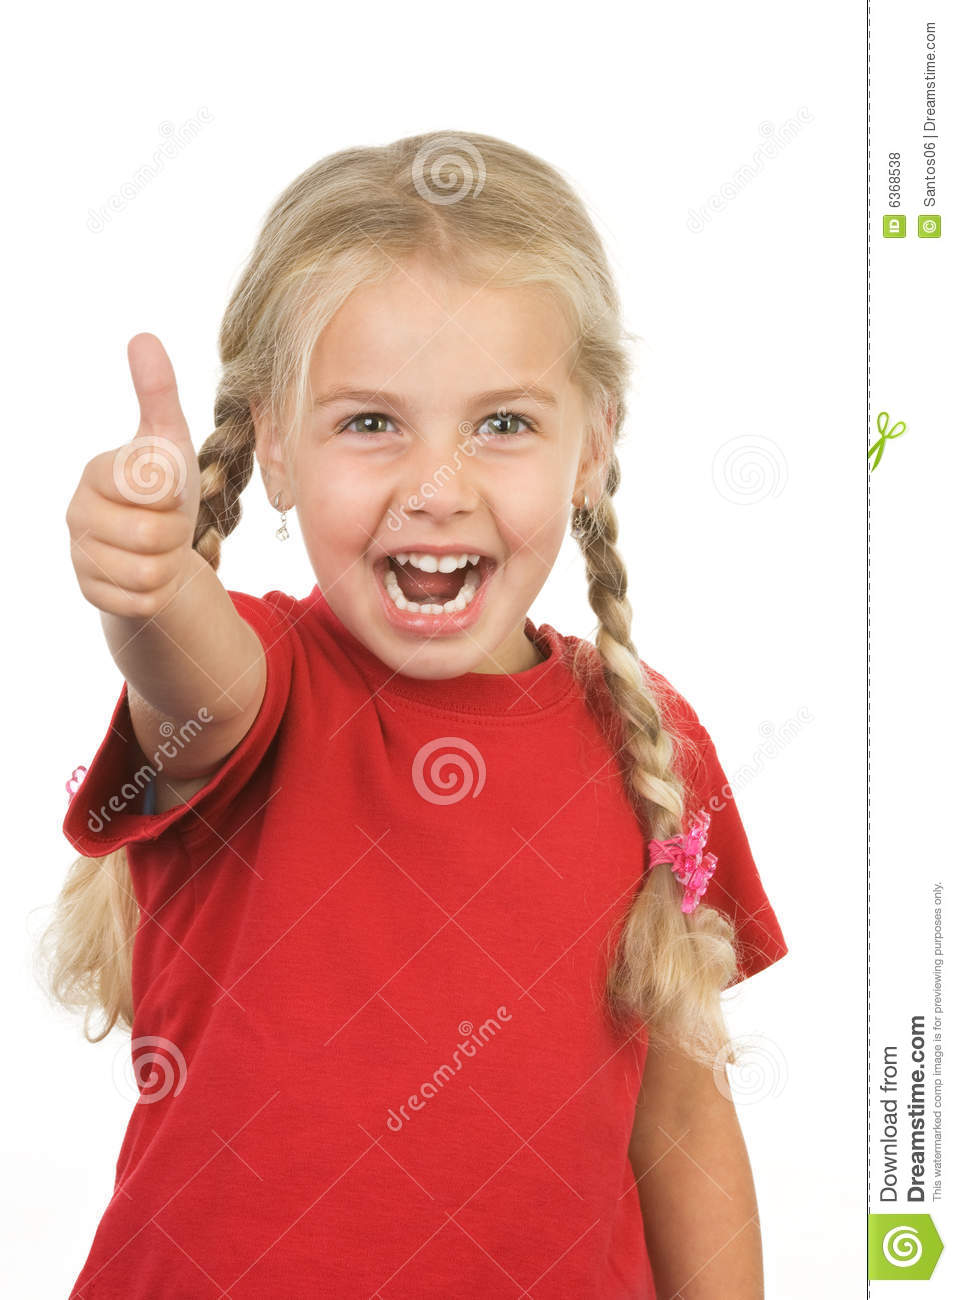 Little Kid Giving Thumbs Up